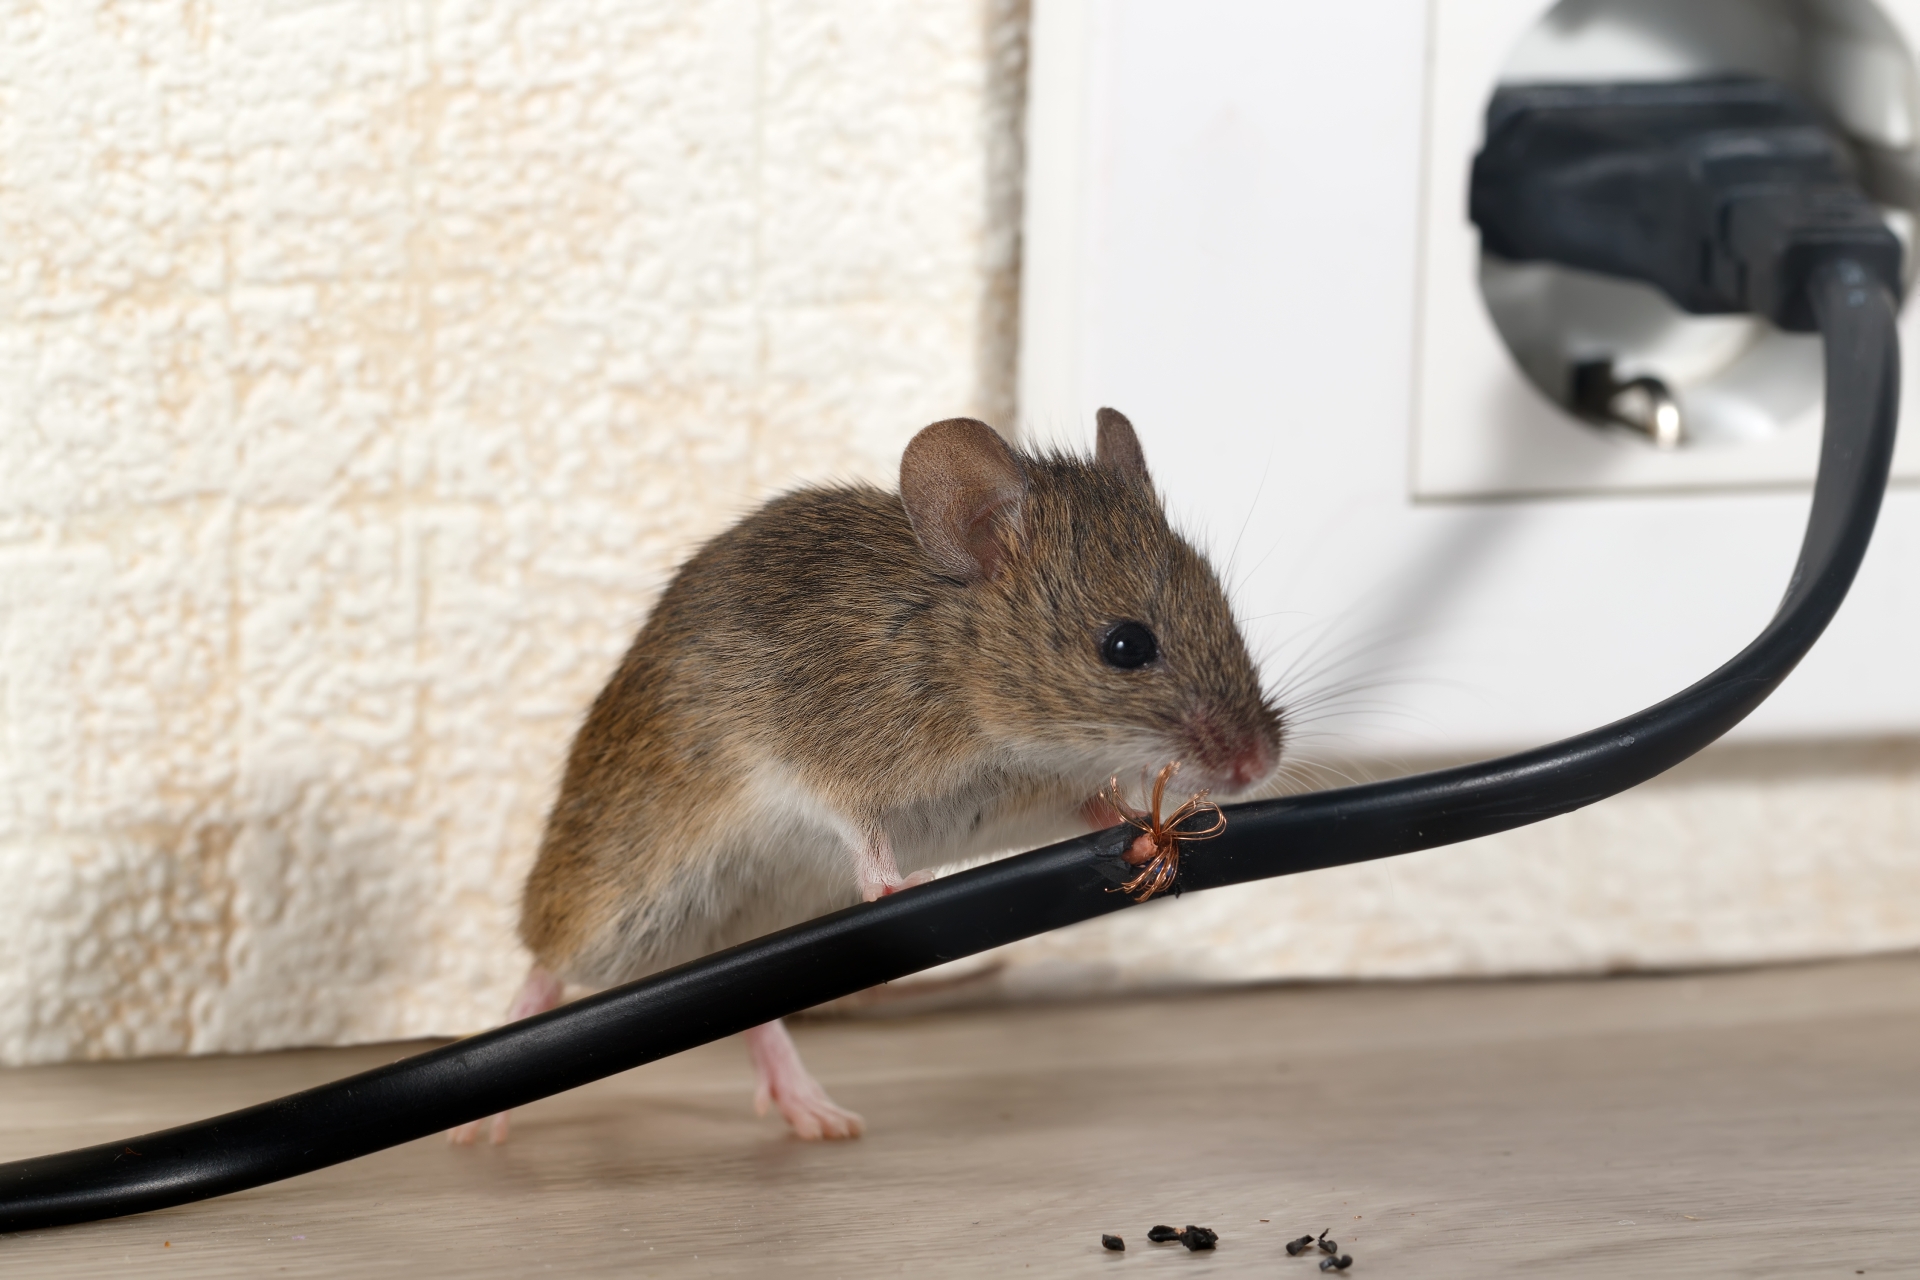 Mice Infestation, Pest Control in Oxhey, South Oxhey, WD19. Call Now 020 8166 9746